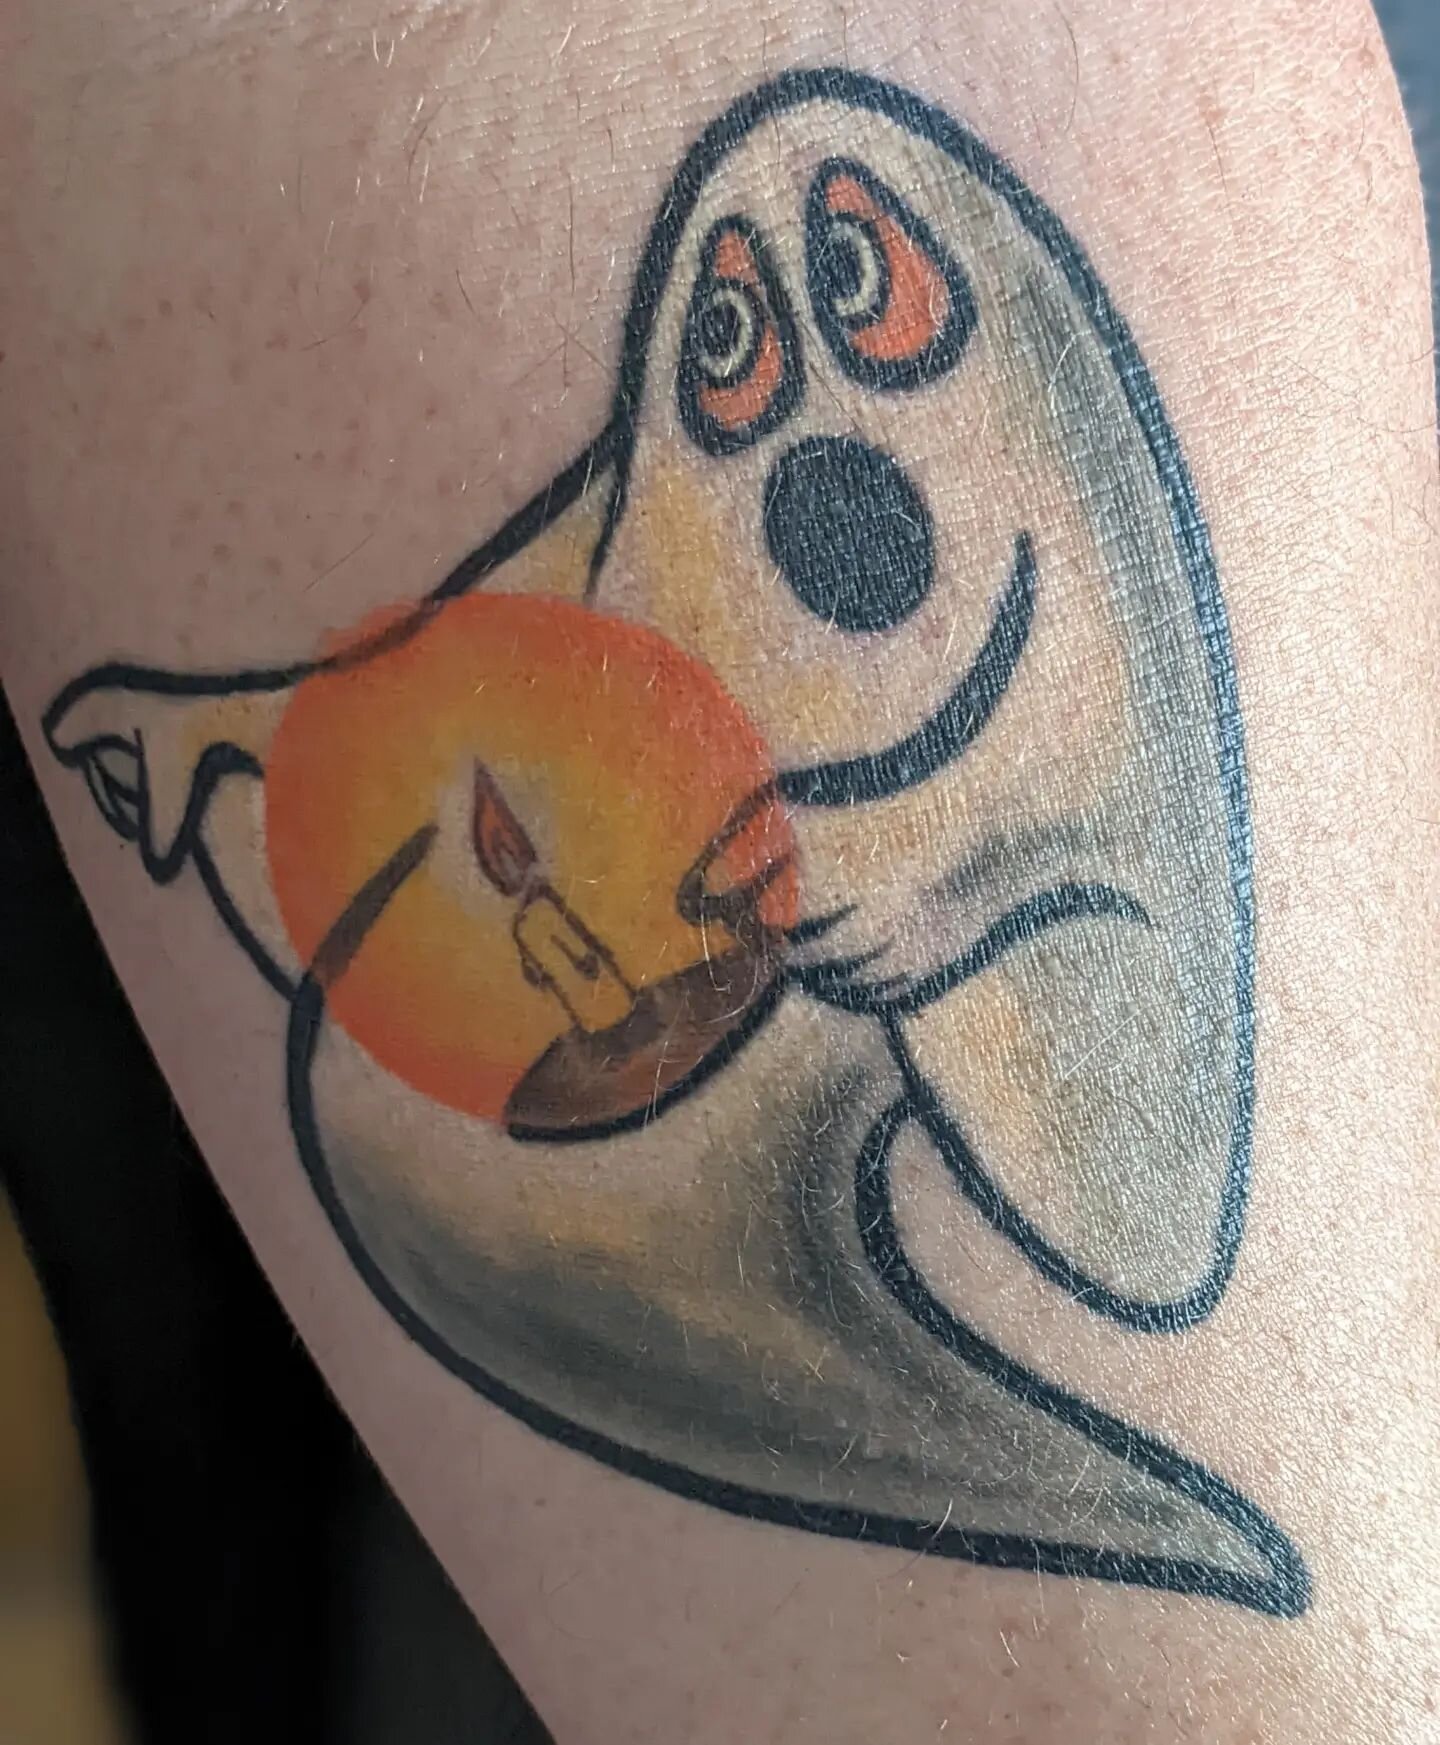 Meant to post this after it was healed and then I totally forgot to do it. If you don't know, this is based on the Beistle vintage Halloween decorations. I don't think this ghost has a name so we lovingly call him Candle Fucker. Thanks to @tattoo_elv